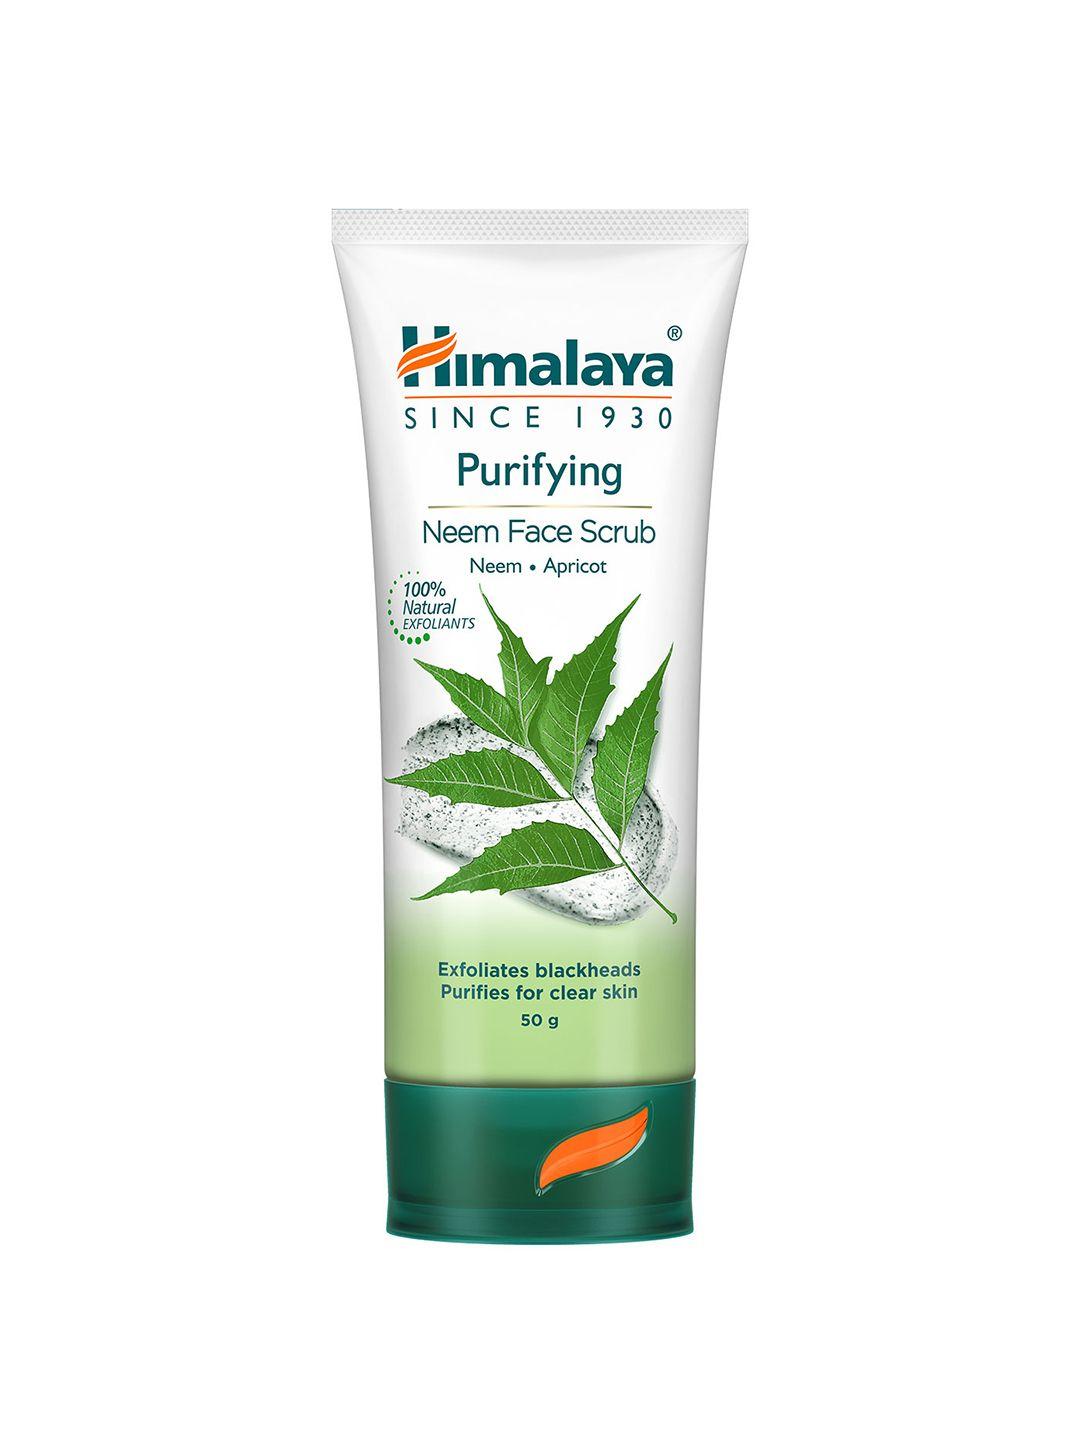 himalaya purifying neem face scrub with apricot for blackheads & acne - 50g